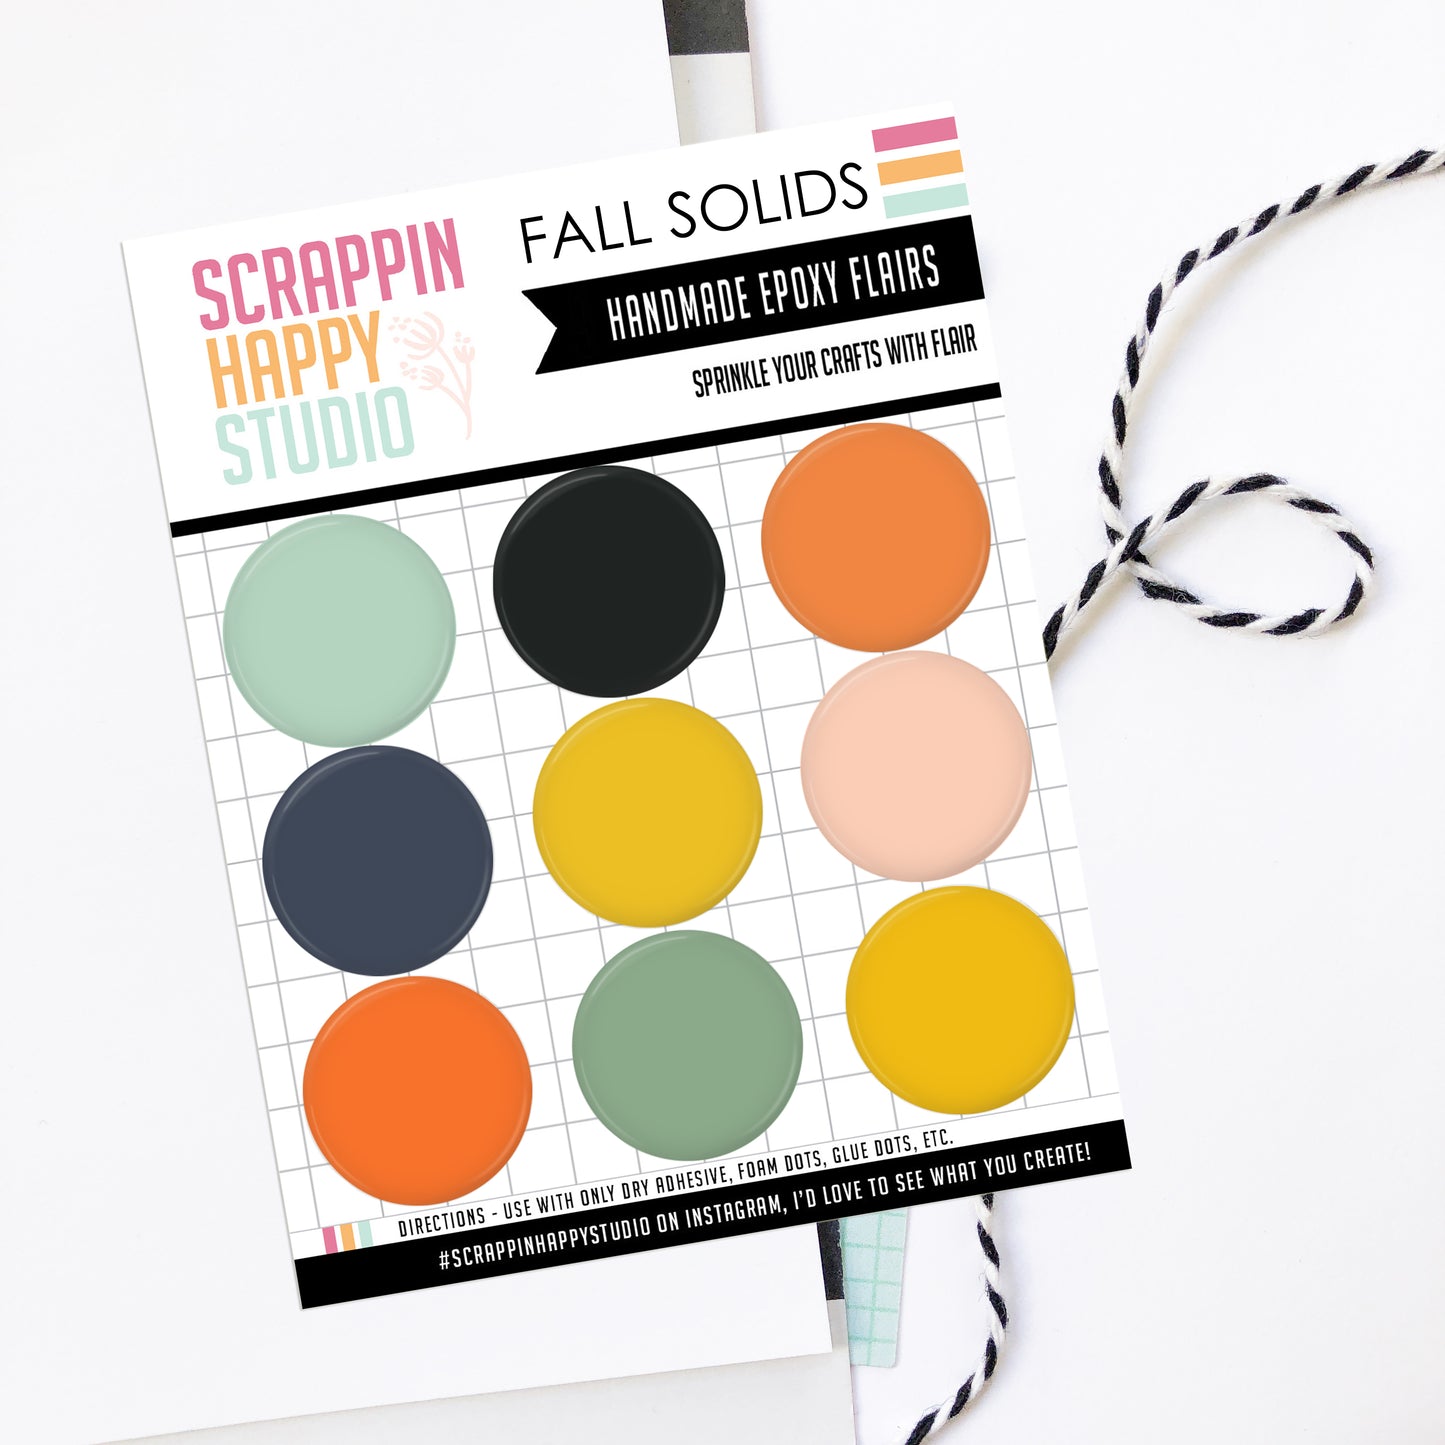 Fall Solids Epoxy Flair